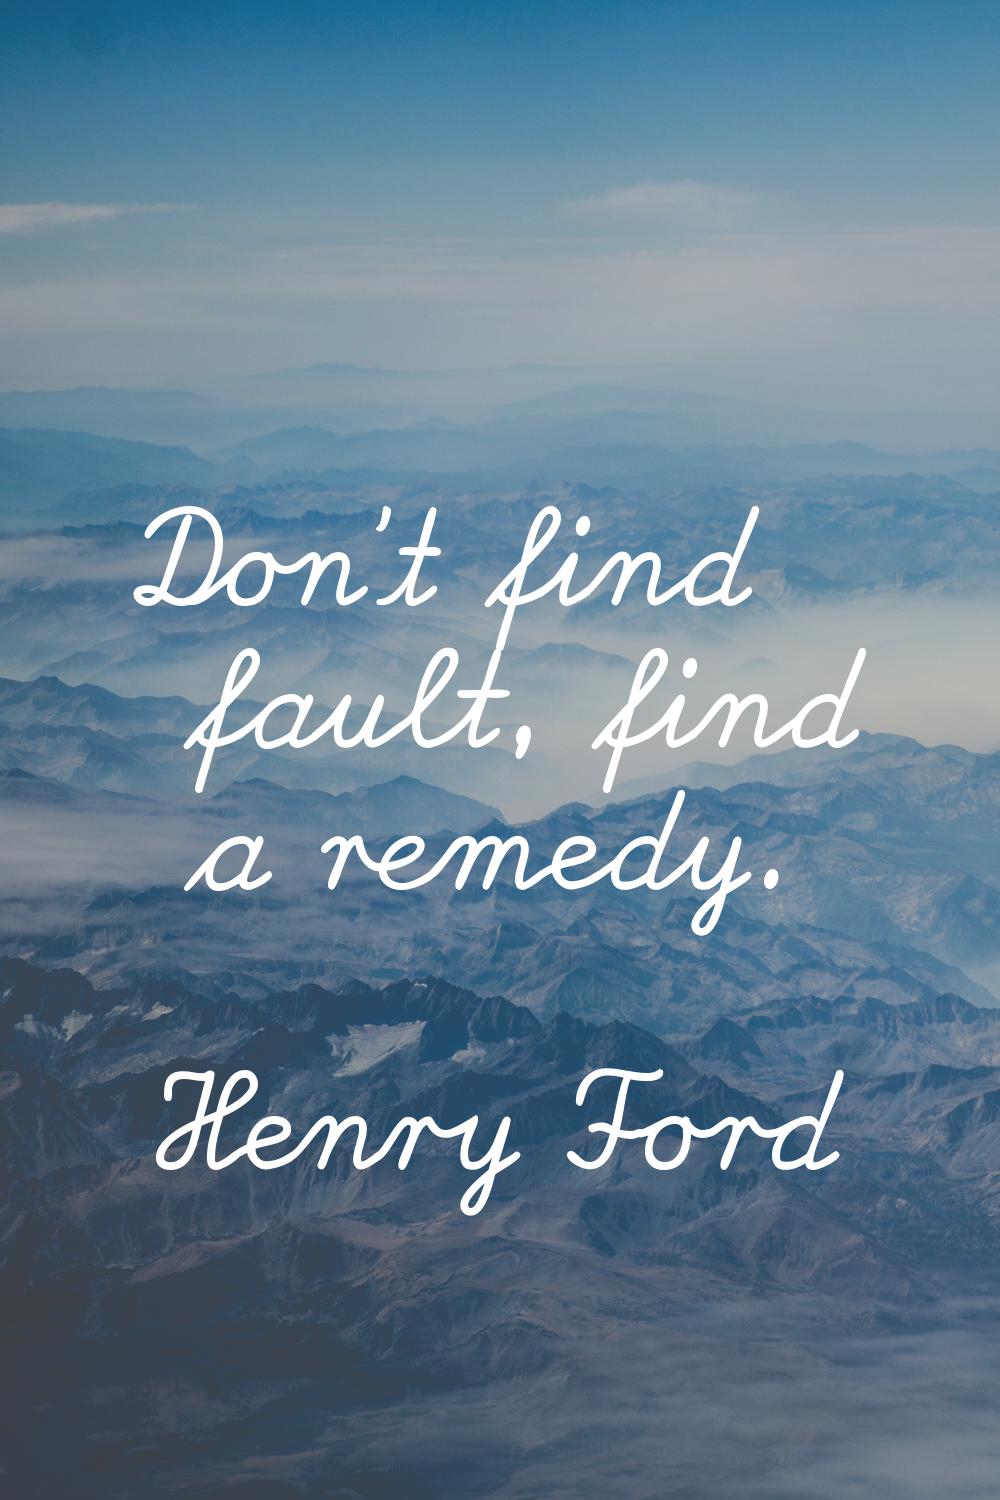 Don't find fault, find a remedy.